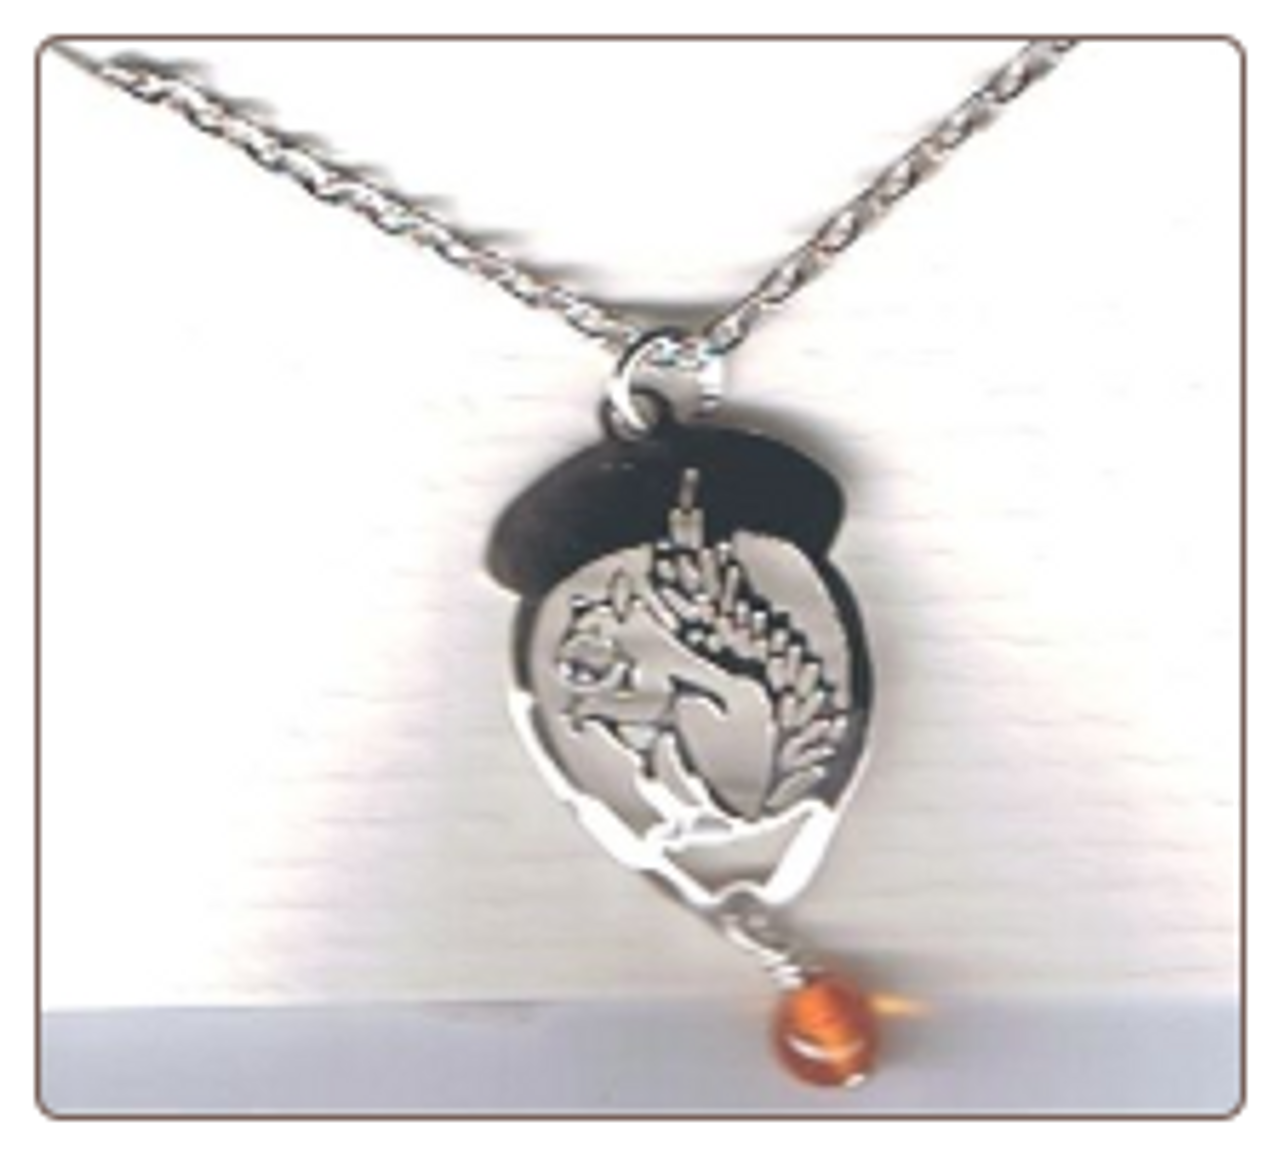 Squirrel in acorn with amber bead necklace.
Necklace is available in 14k goldfill